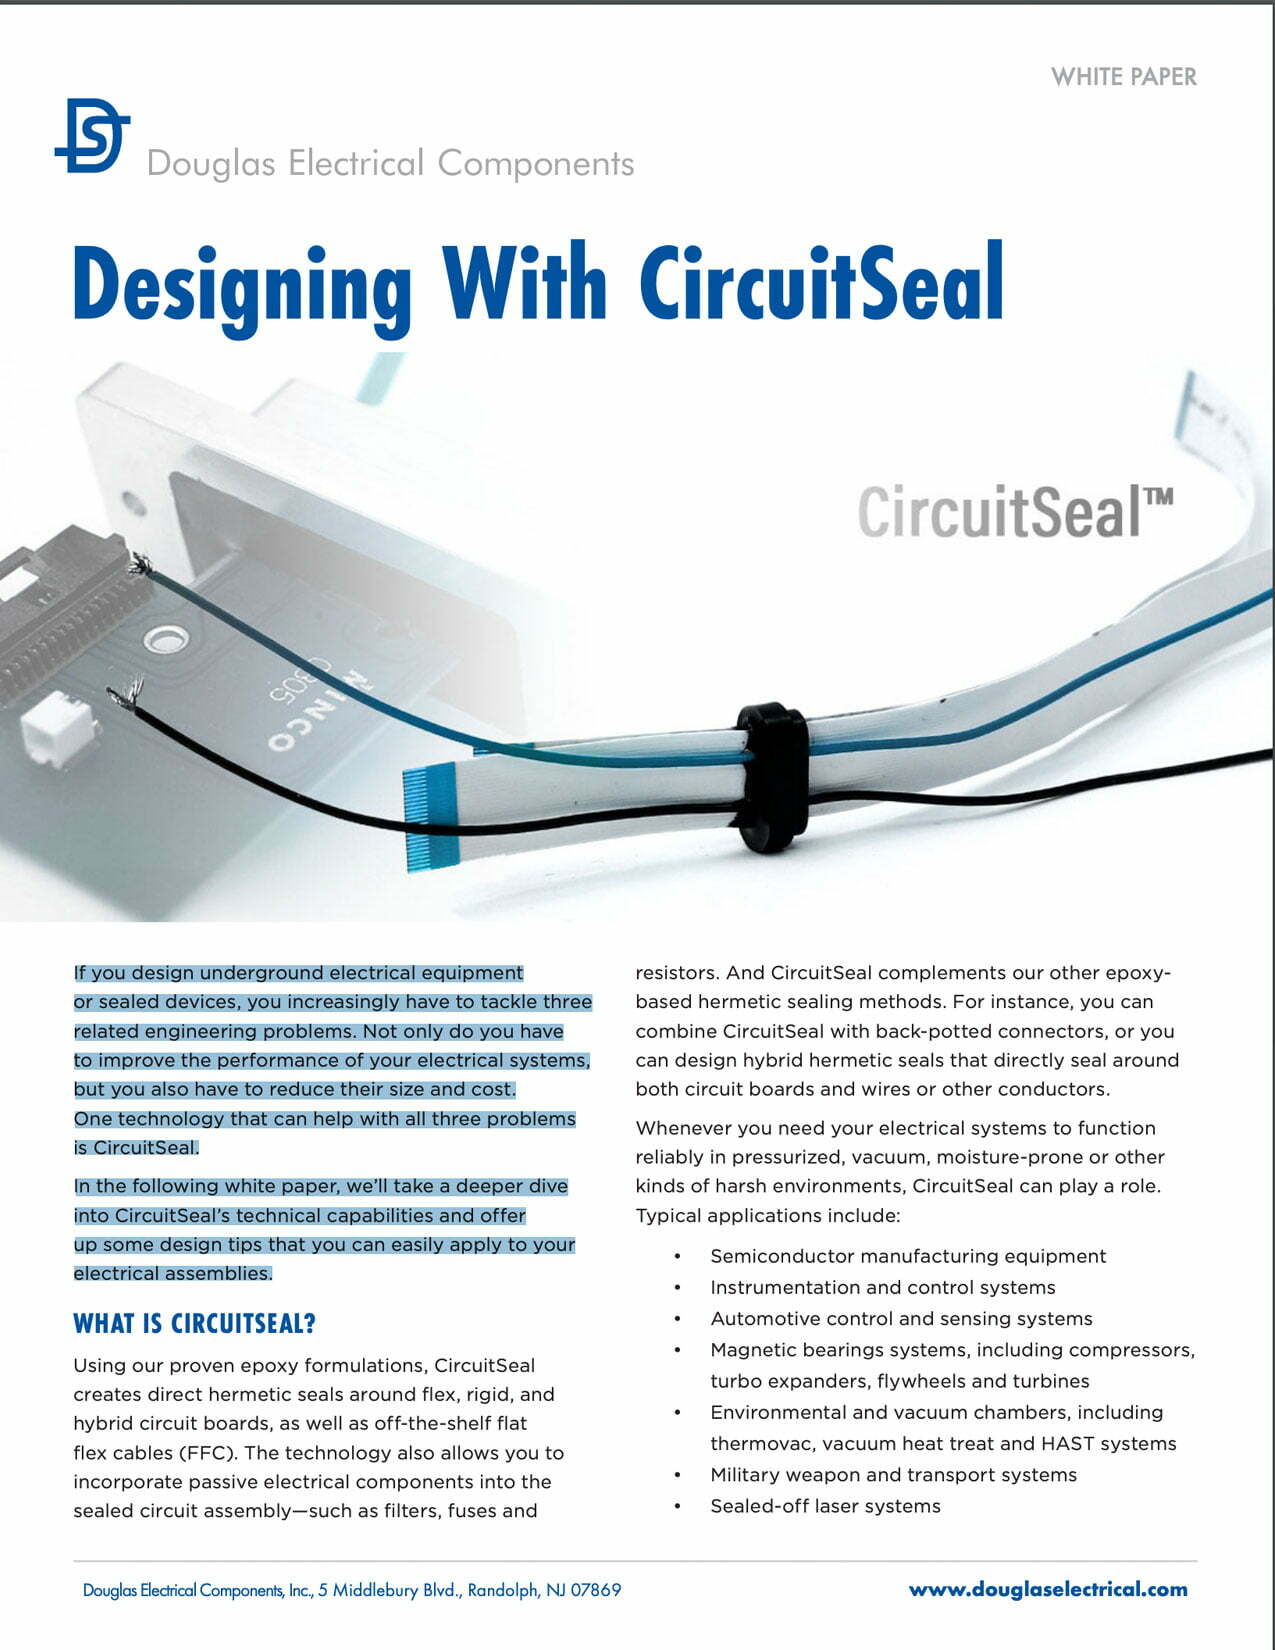 Designing with CircuitSeal whitepaper cover